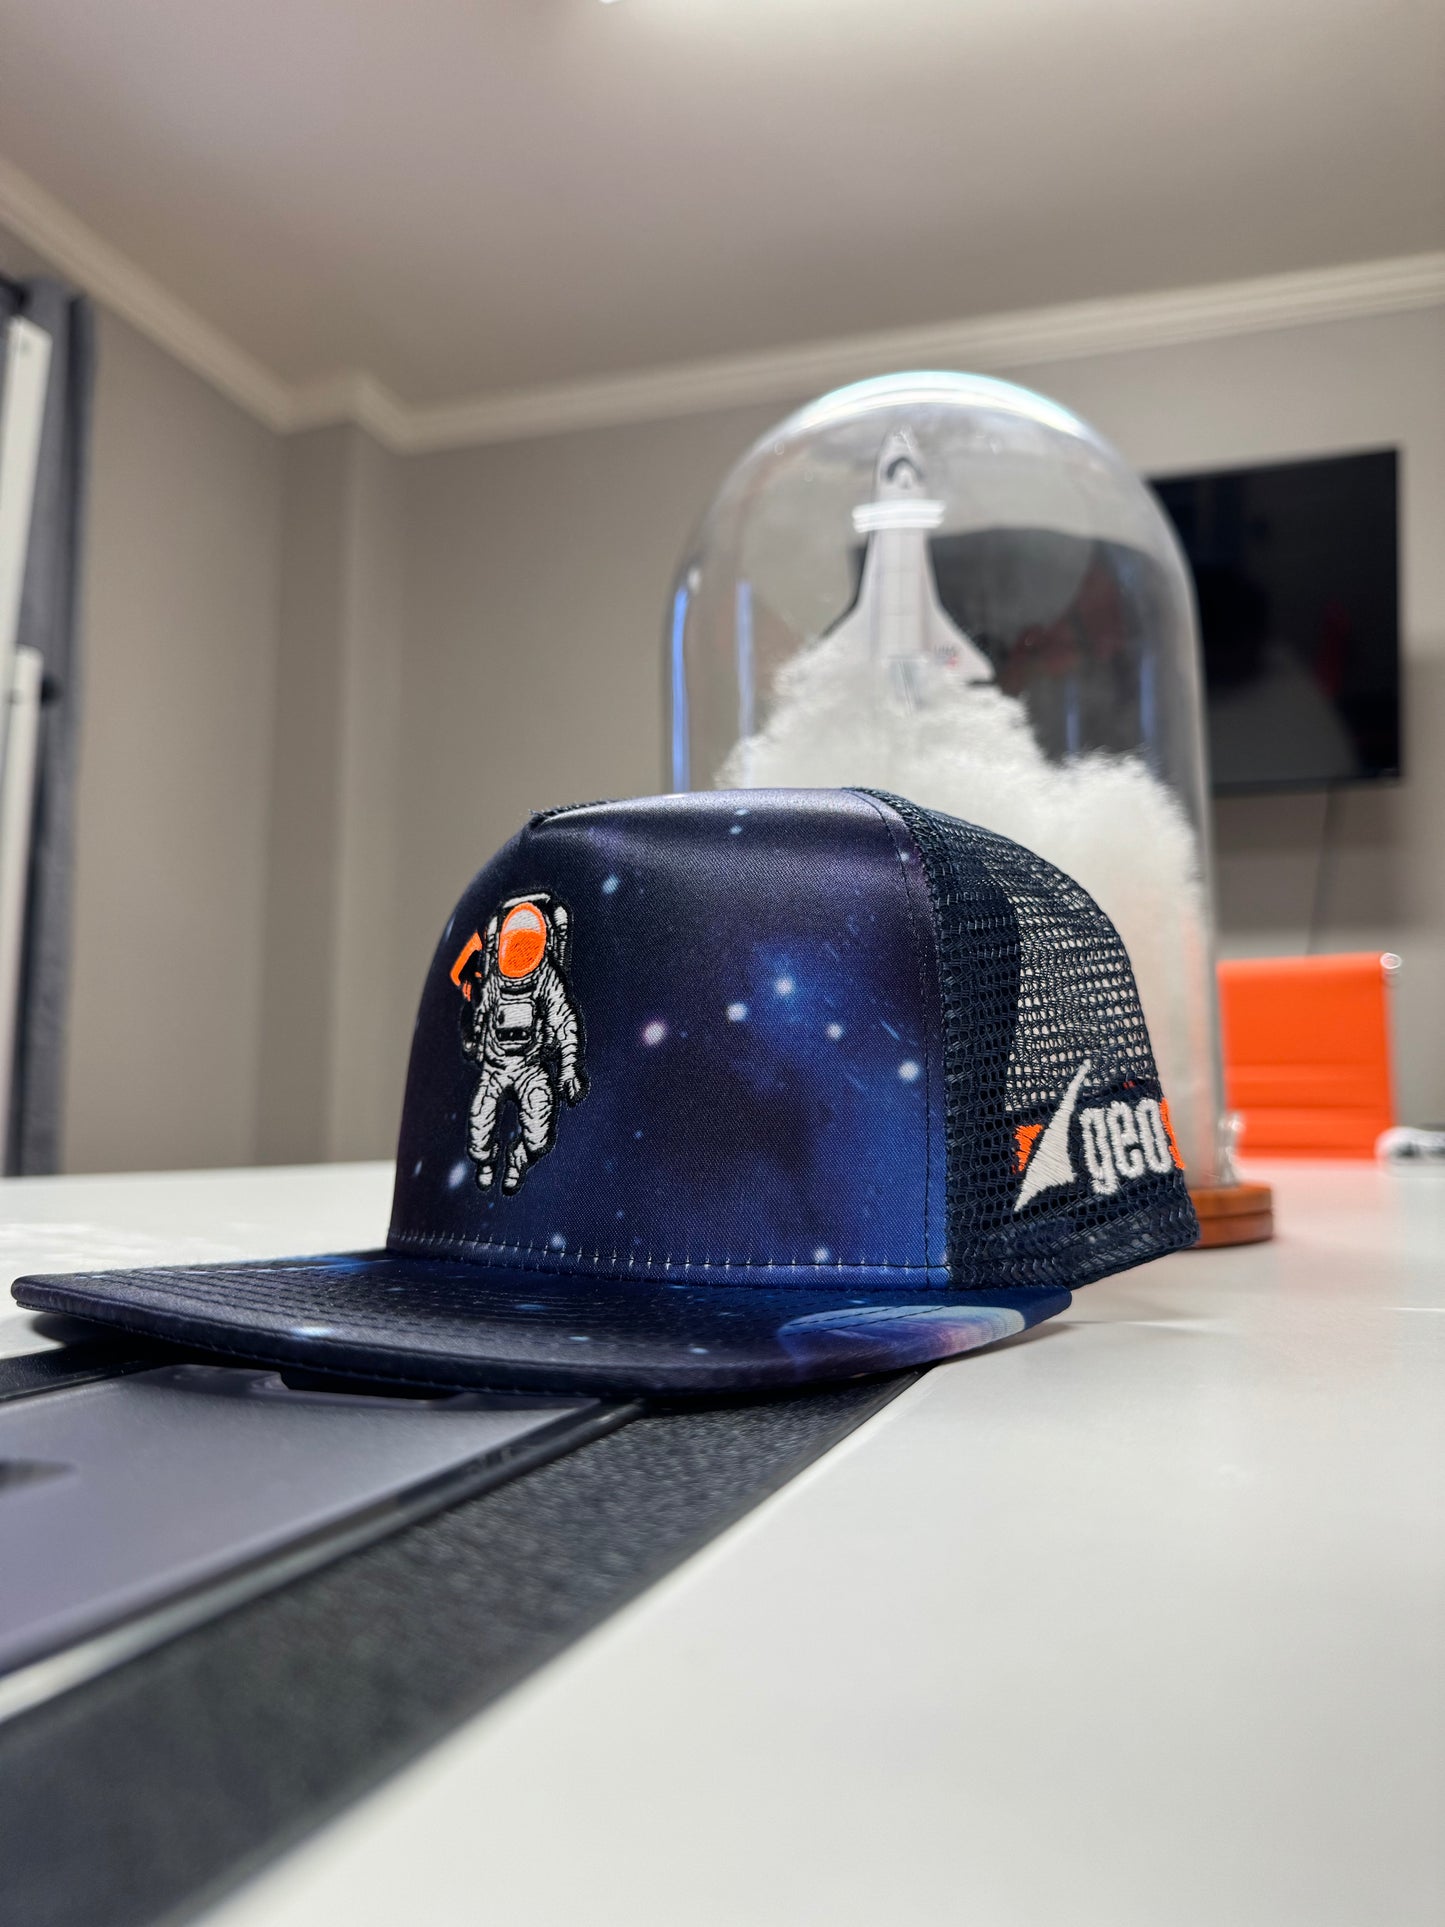 *LIMITED EDITION* To the moon galaxy hats